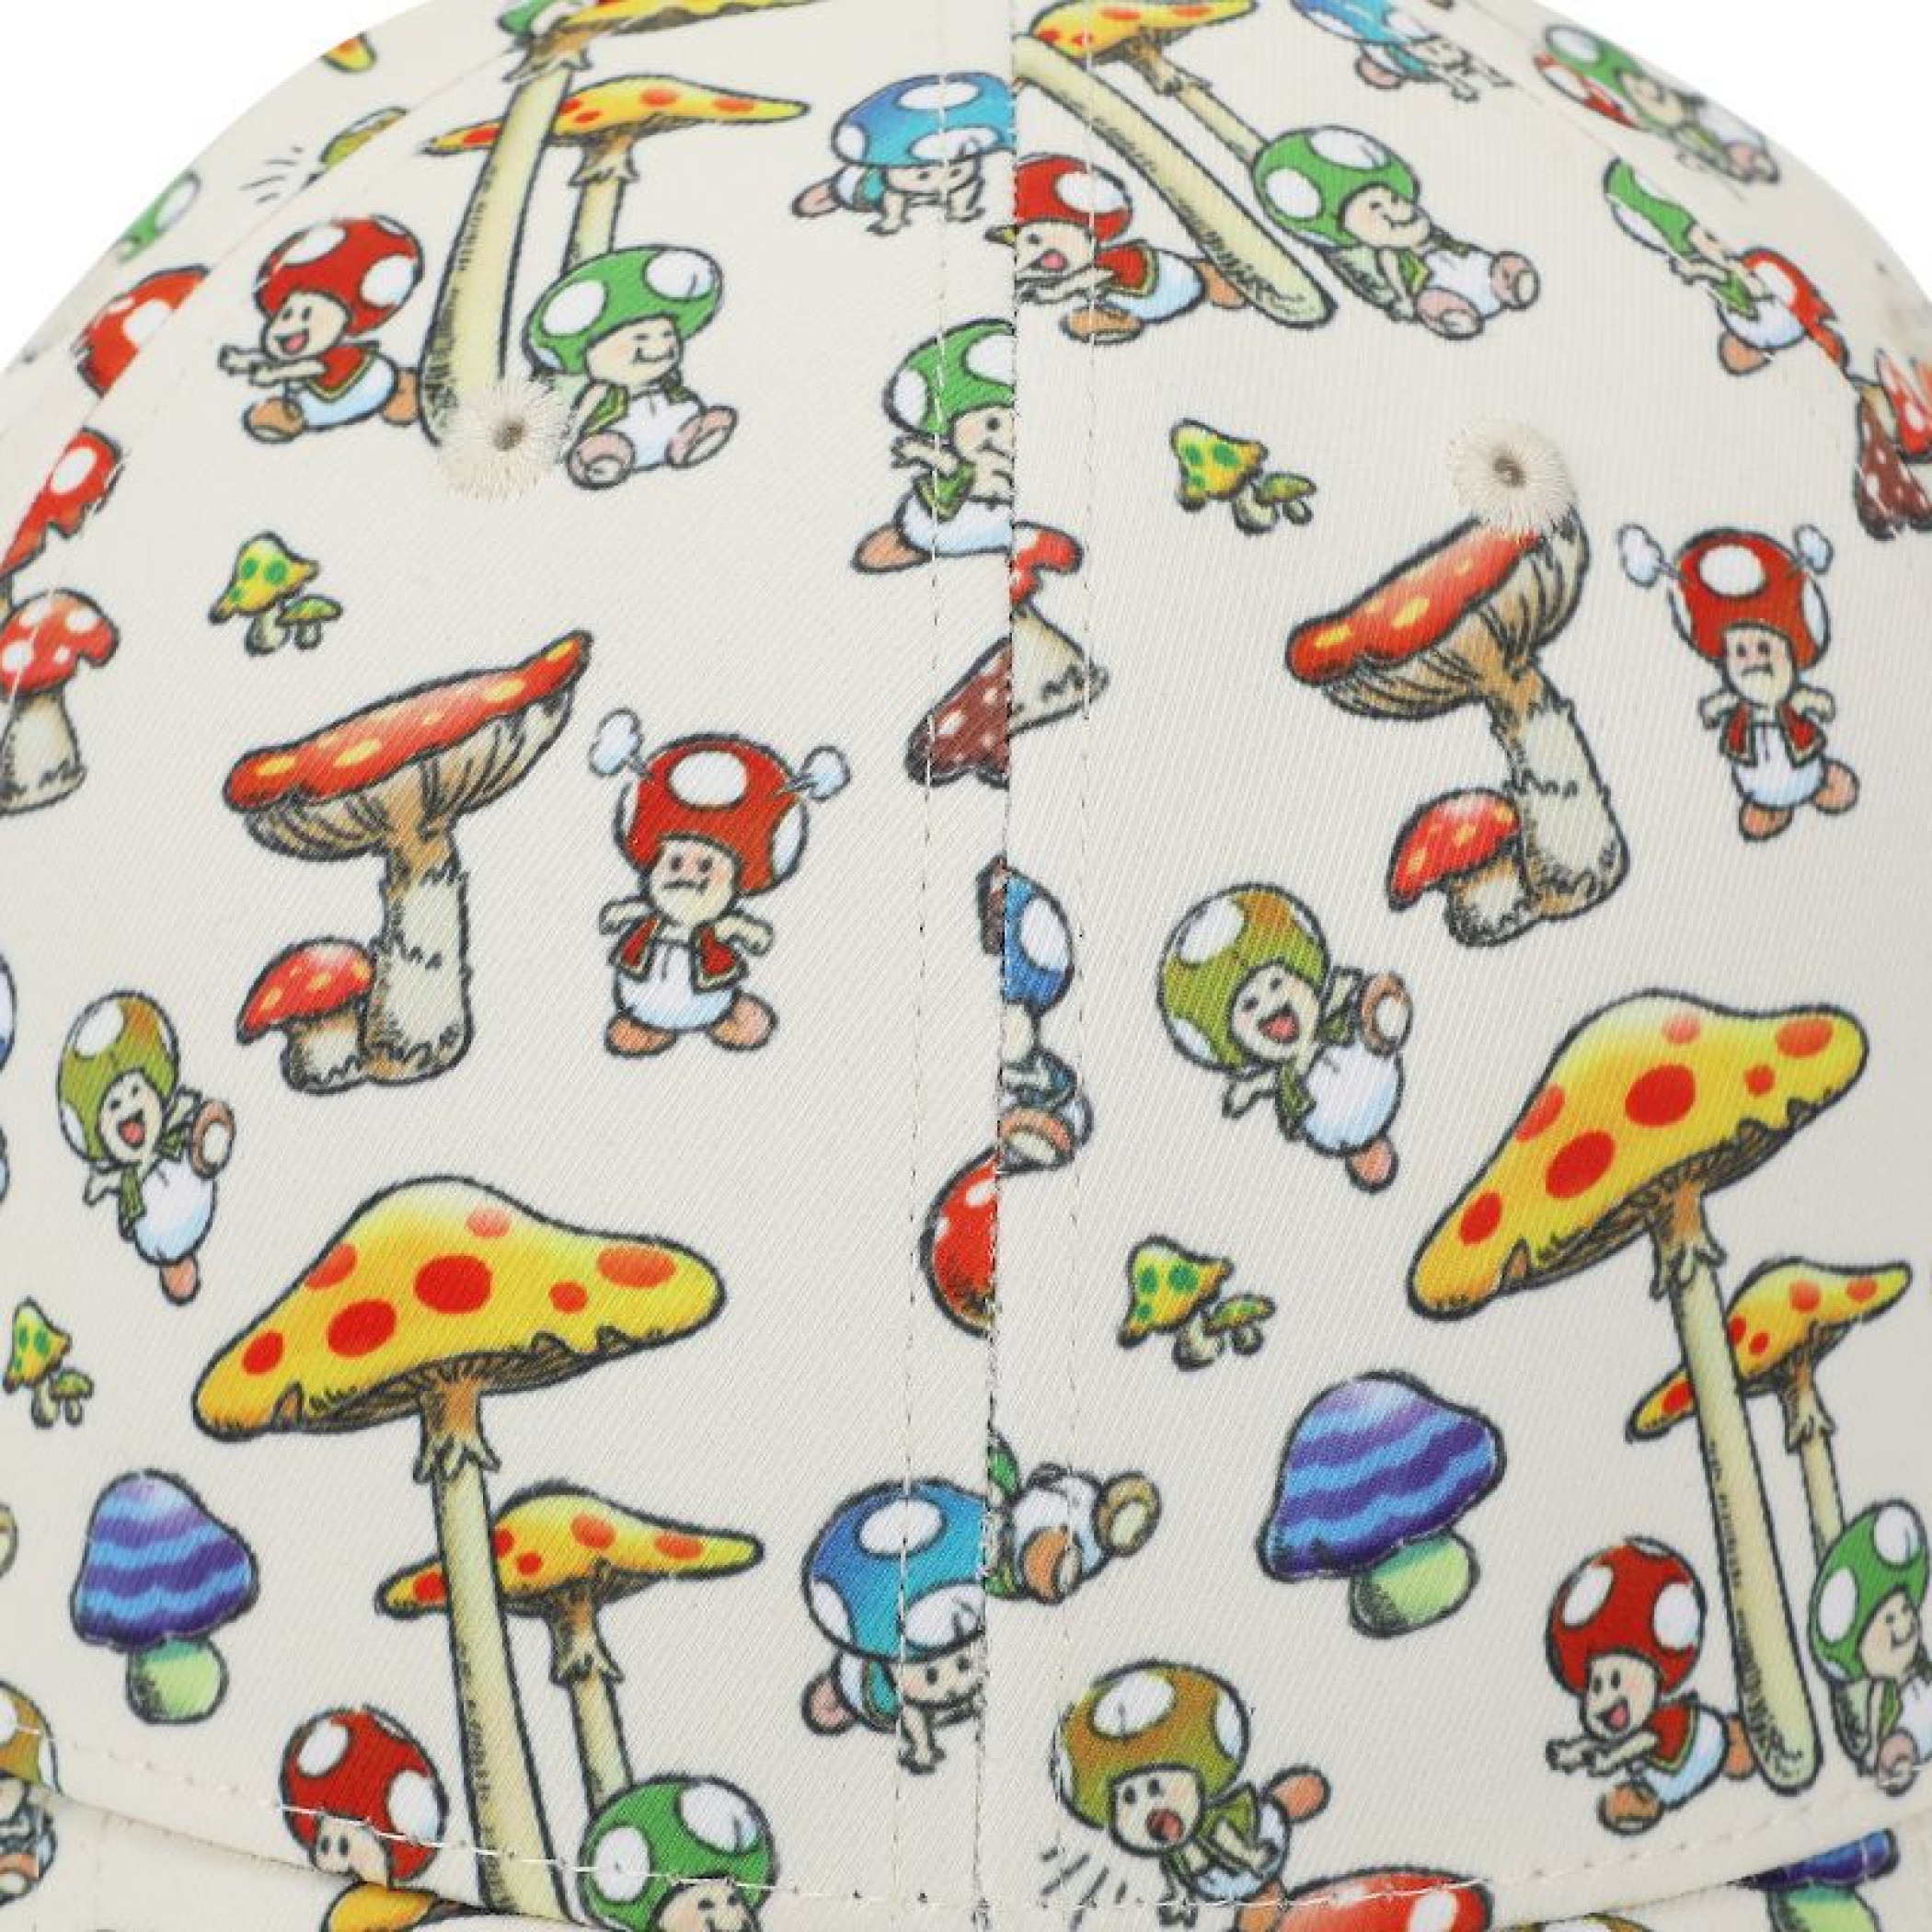 Super Mario Bros. Toad and Mushrooms Pre-Curved Snapback Hat